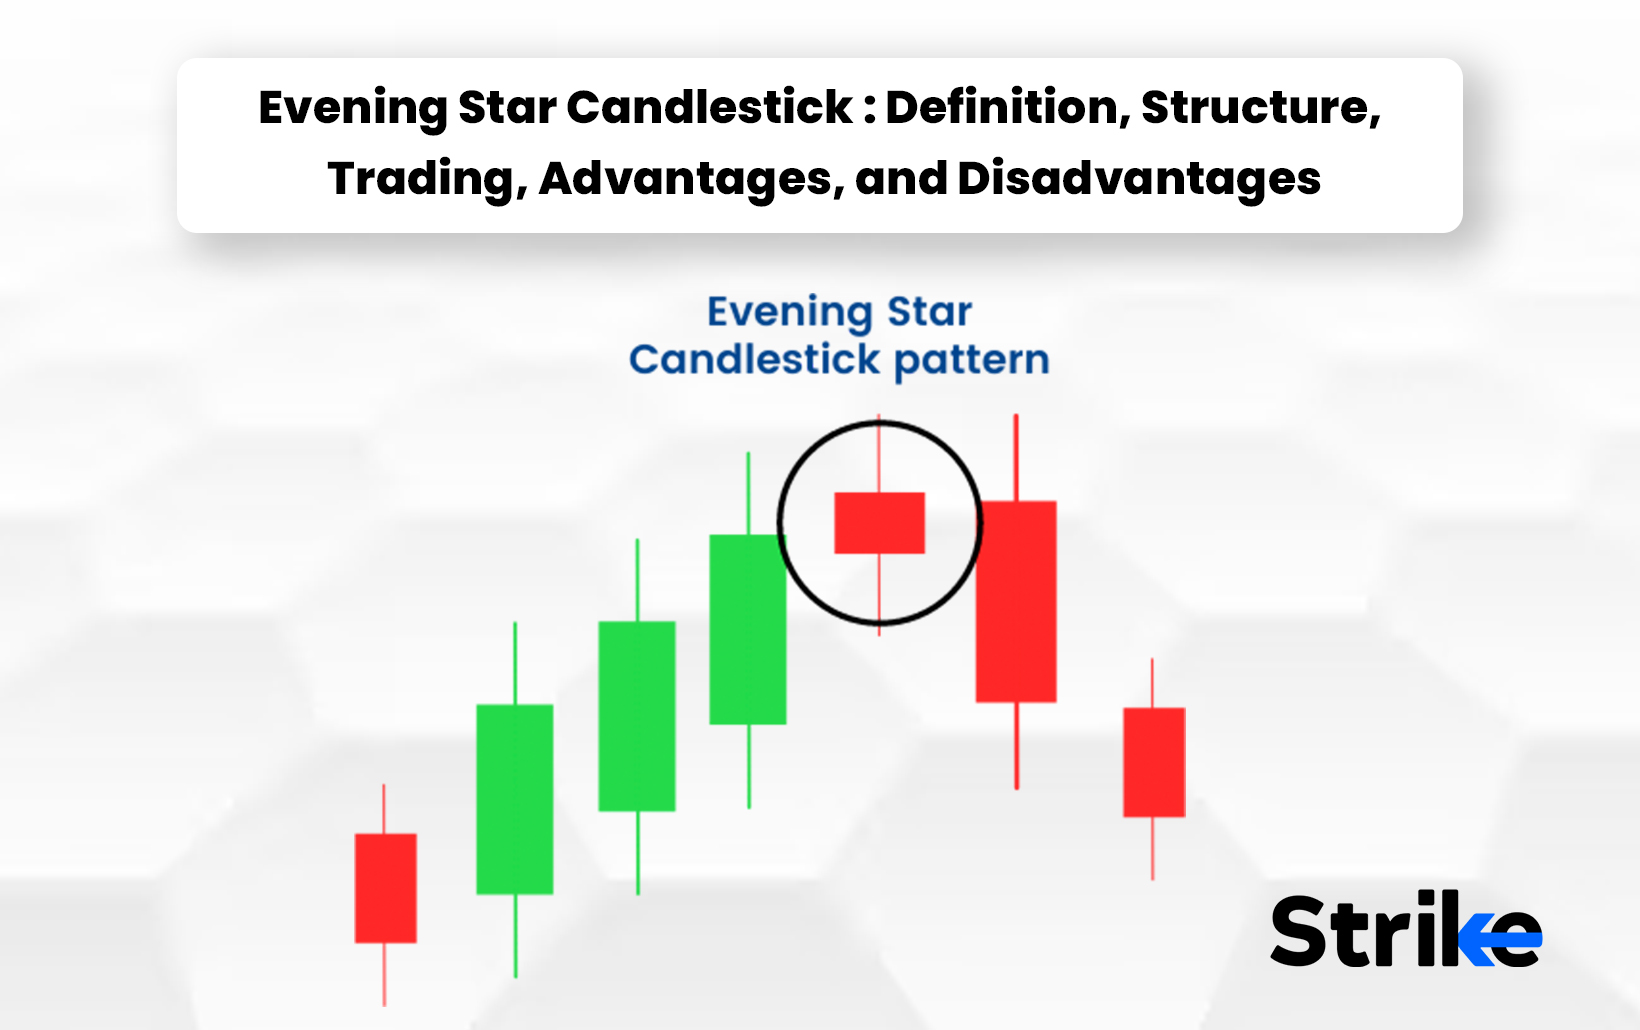 Evening Star Candlestick: Definition, Structure, Trading, Advantages, and Disadvantages